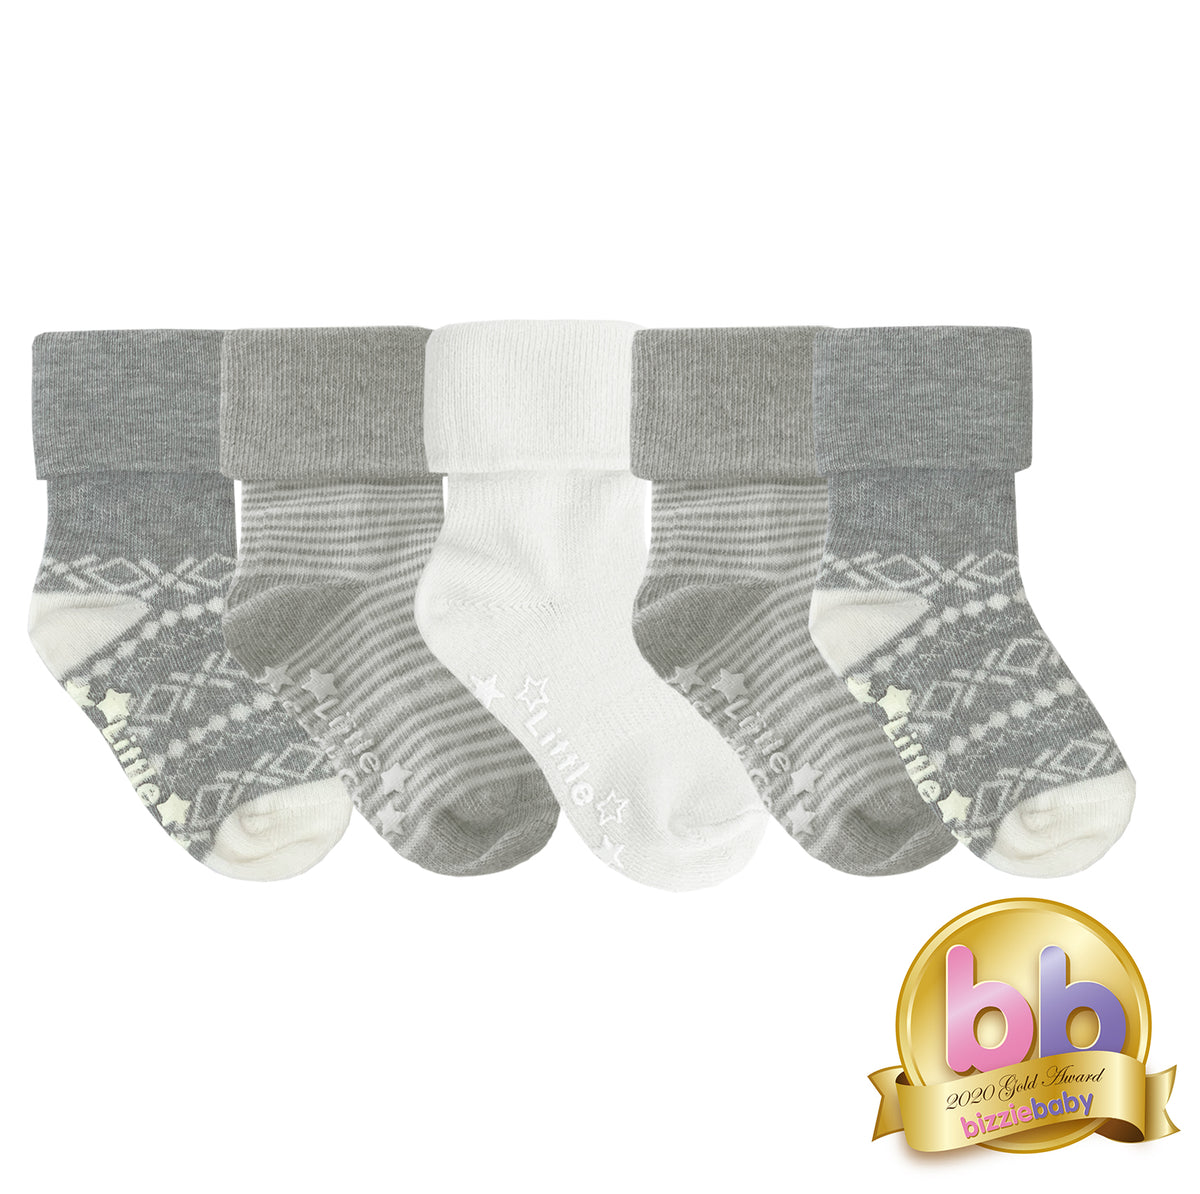 Non-Slip Stay on Baby and Toddler Socks - 5 Pack in Nordic, Grey & Marshmallow White